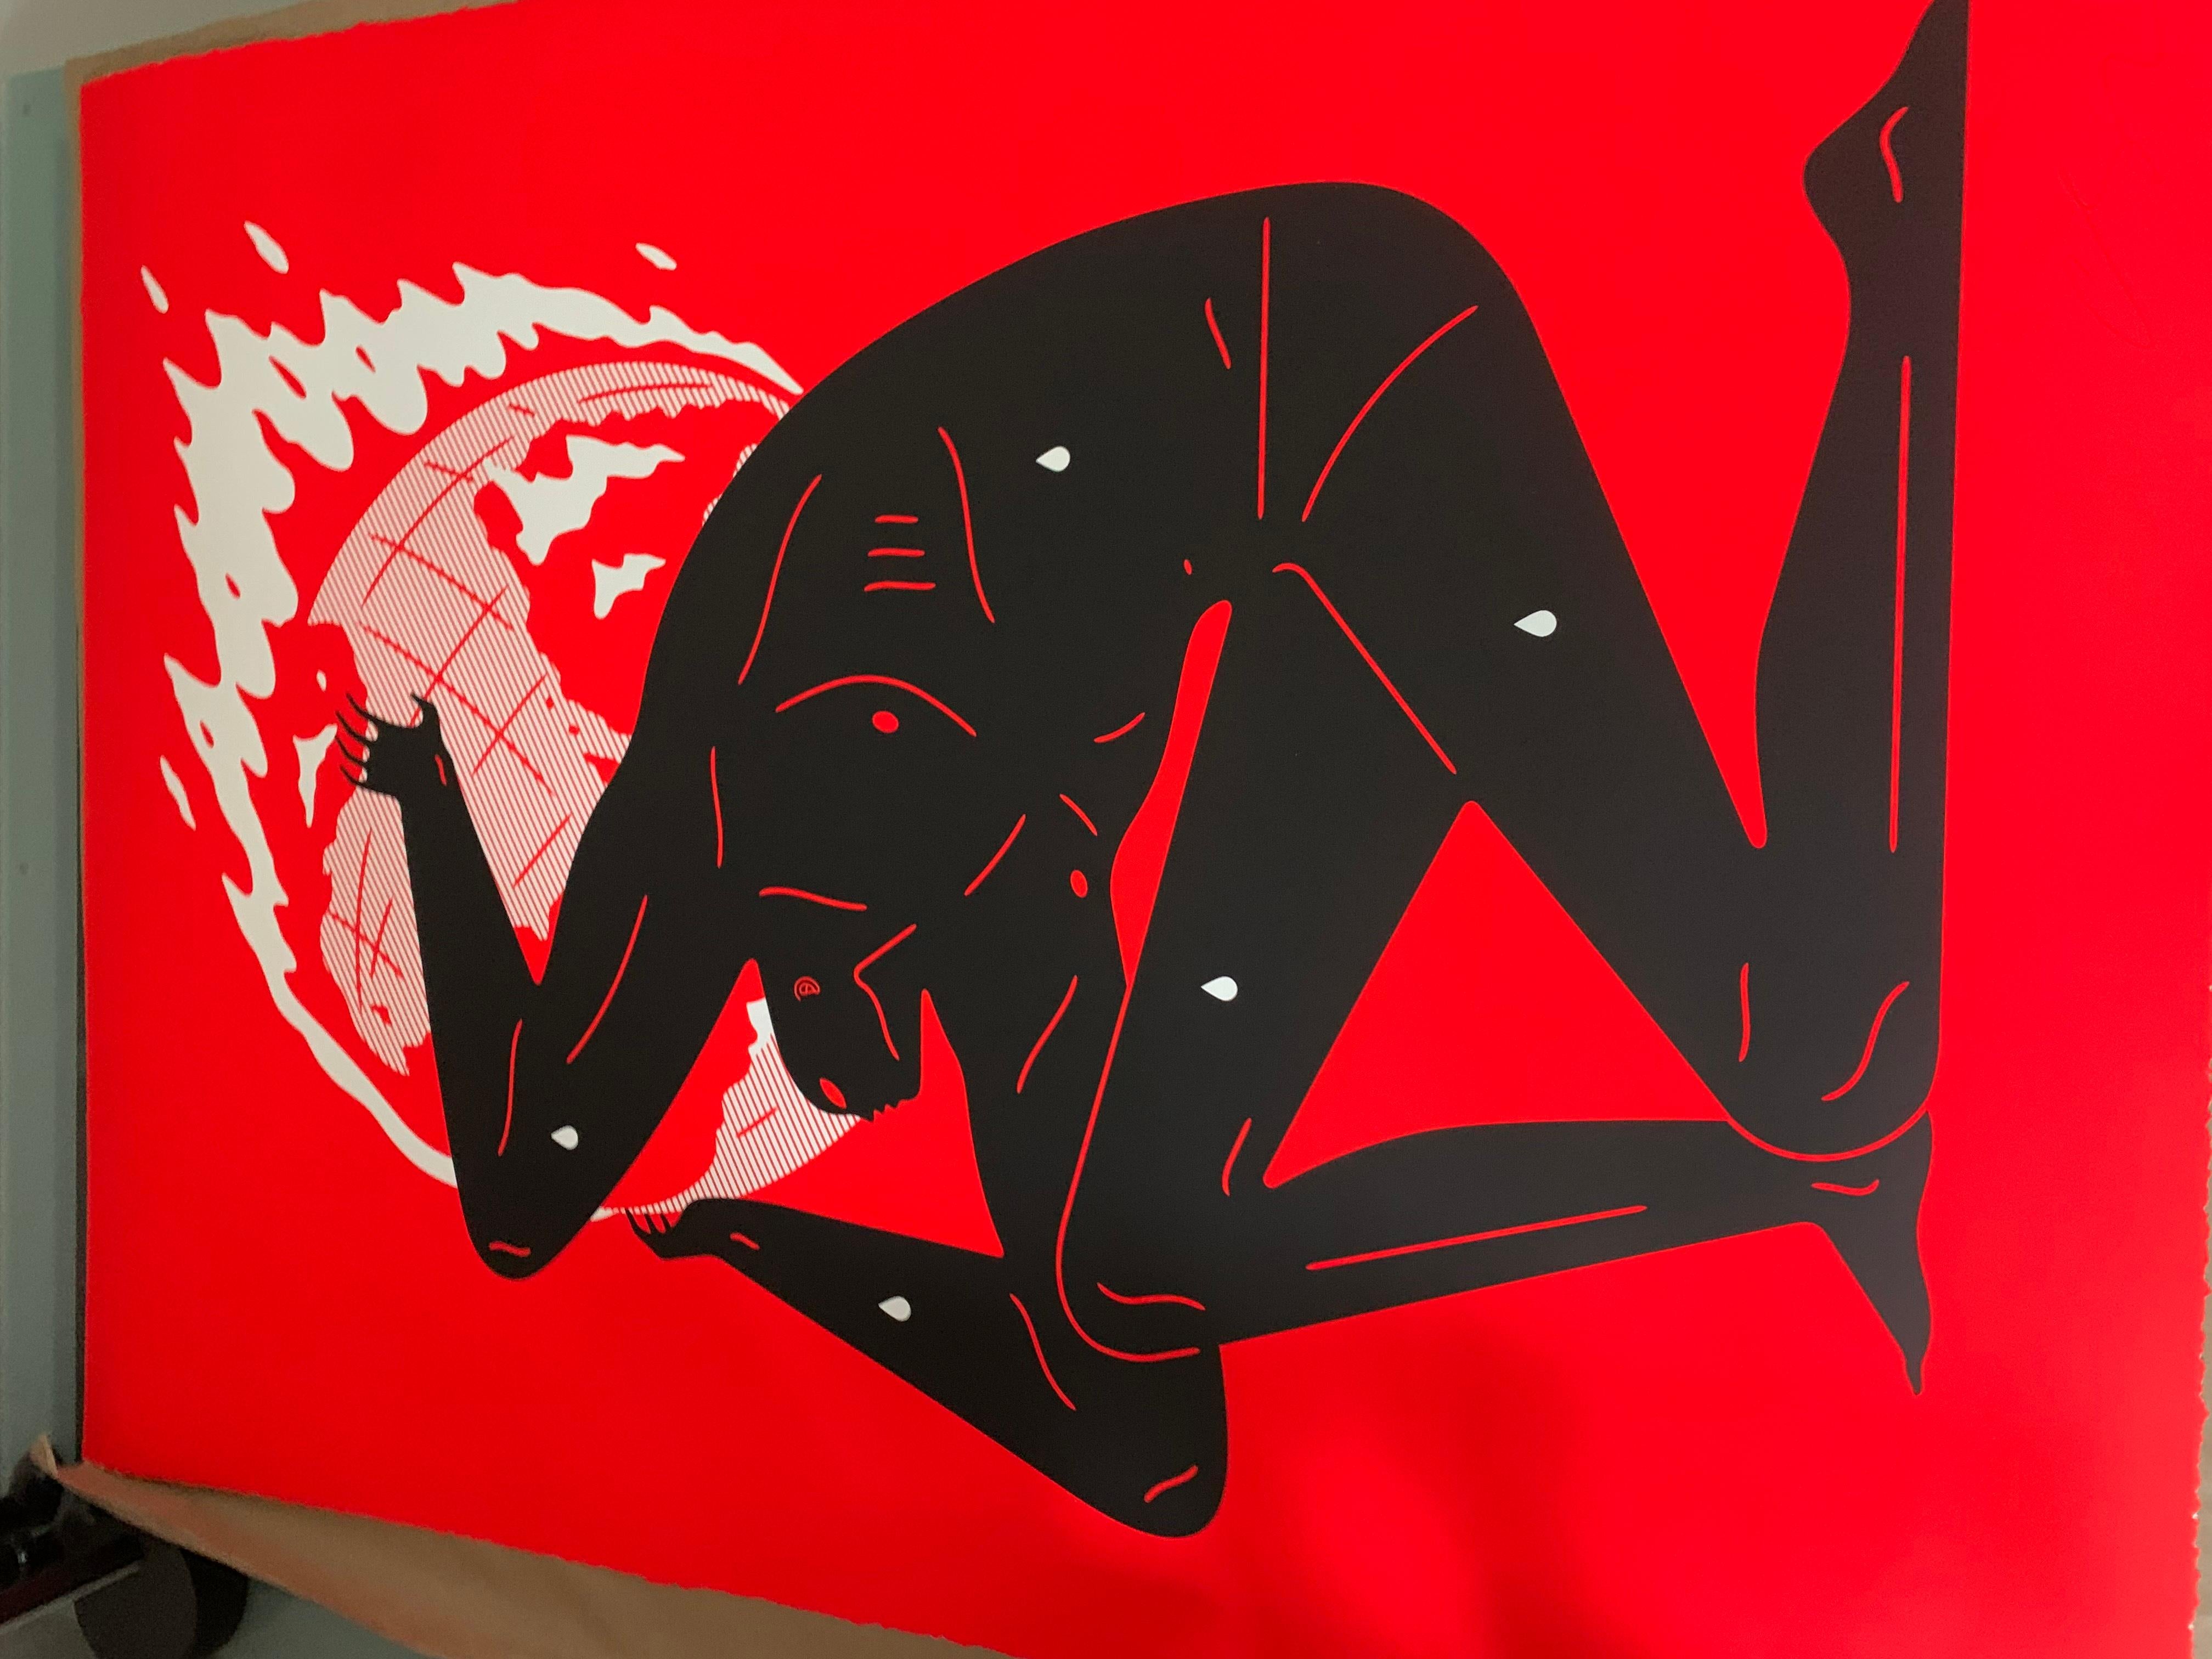 Get ready for a fiery addition to your art collection with Cleon Peterson’s 